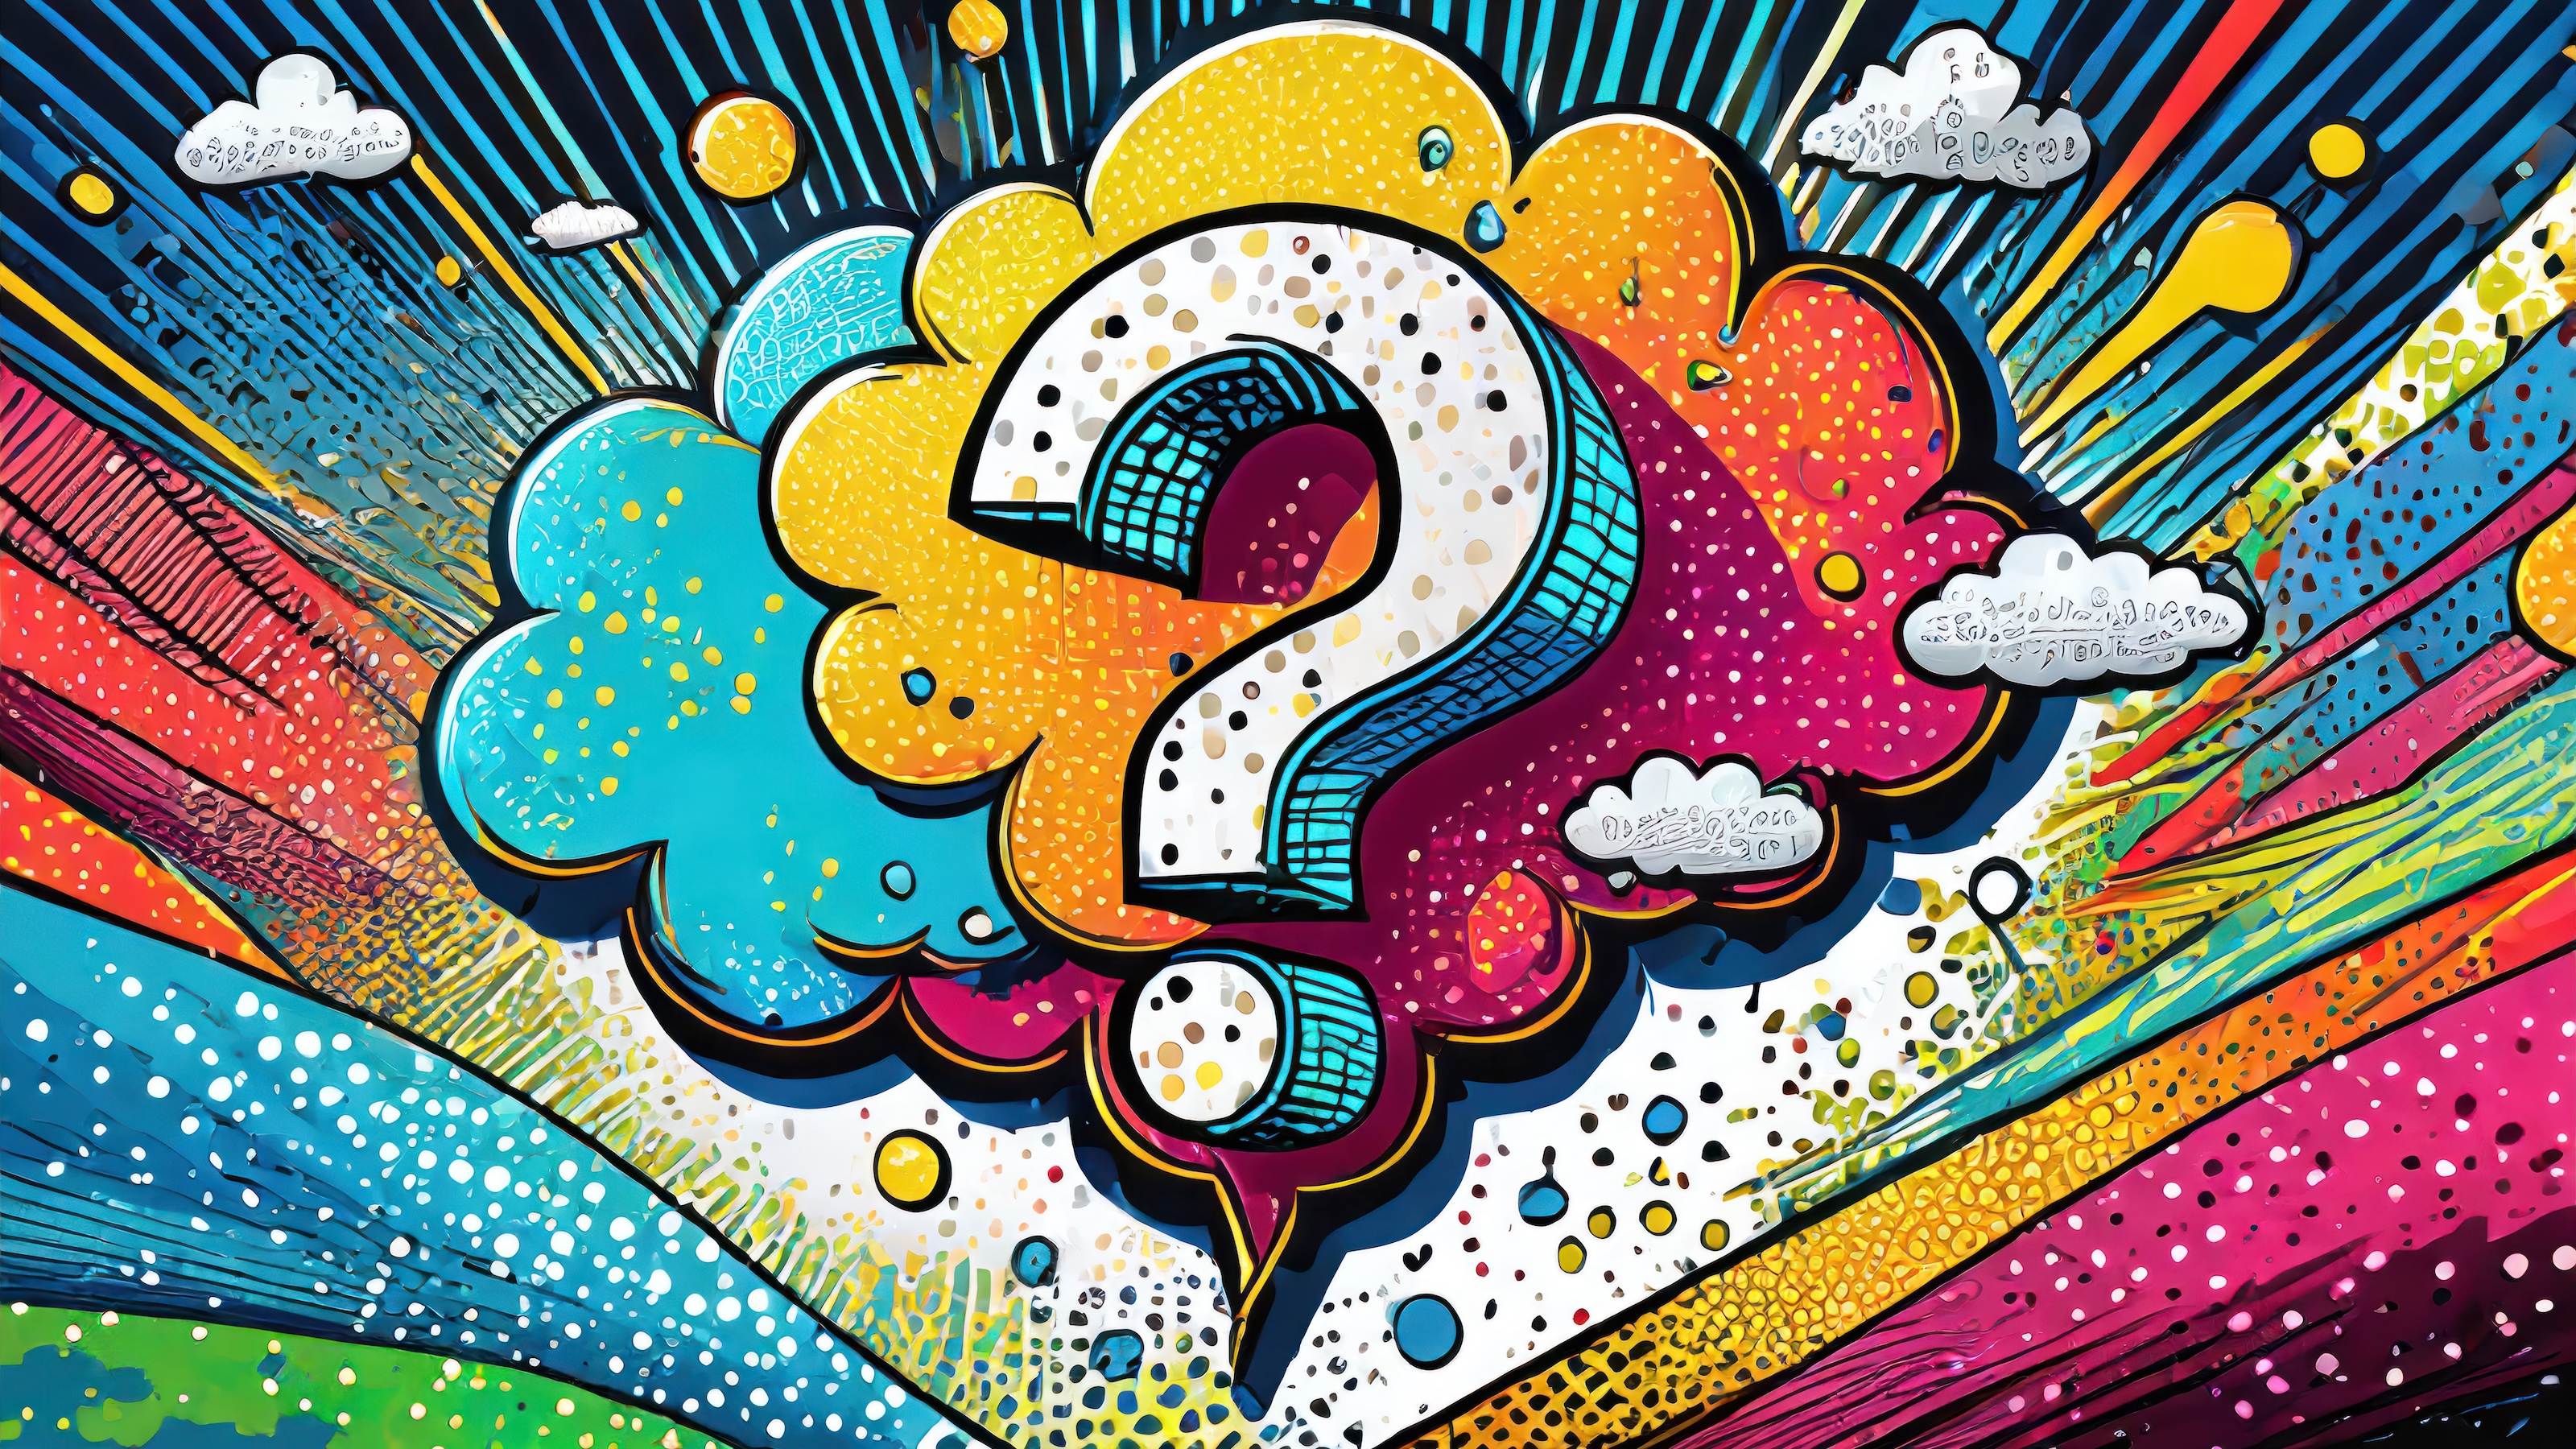 An illustration of a question mark on a colorful background, adding a touch of beauty.